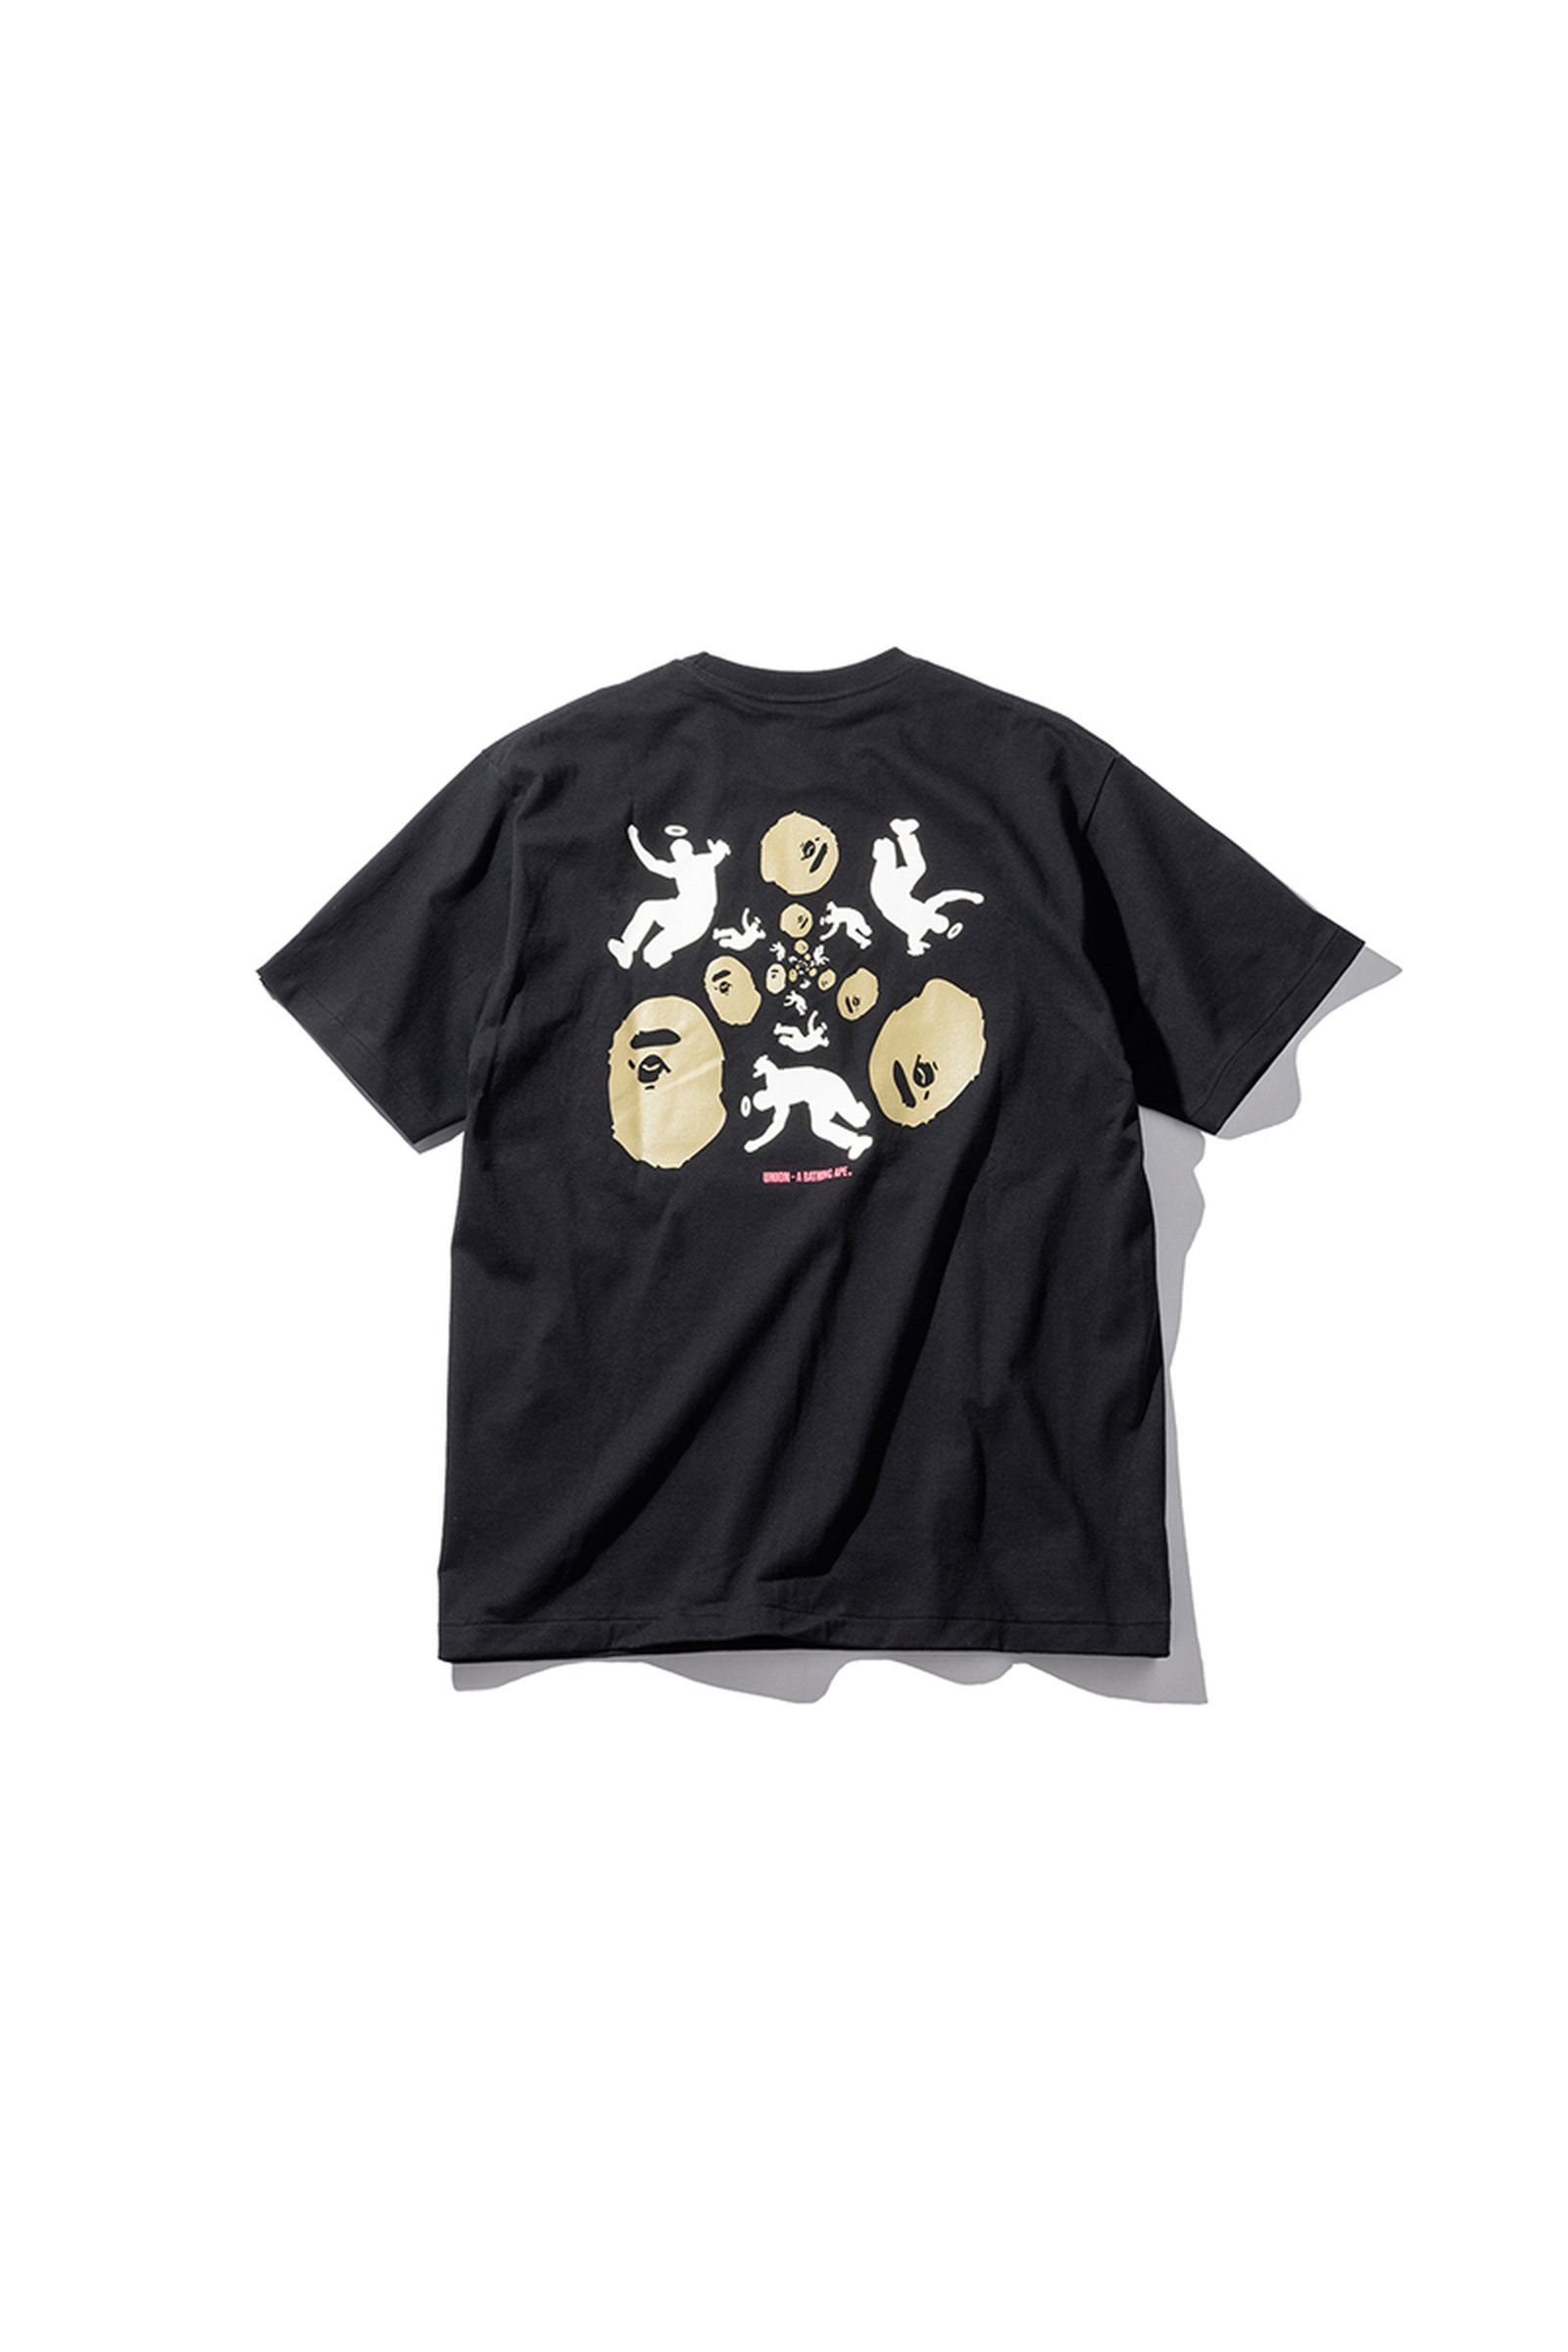 bape-union-30-year-anniversary-collab-collection (7)